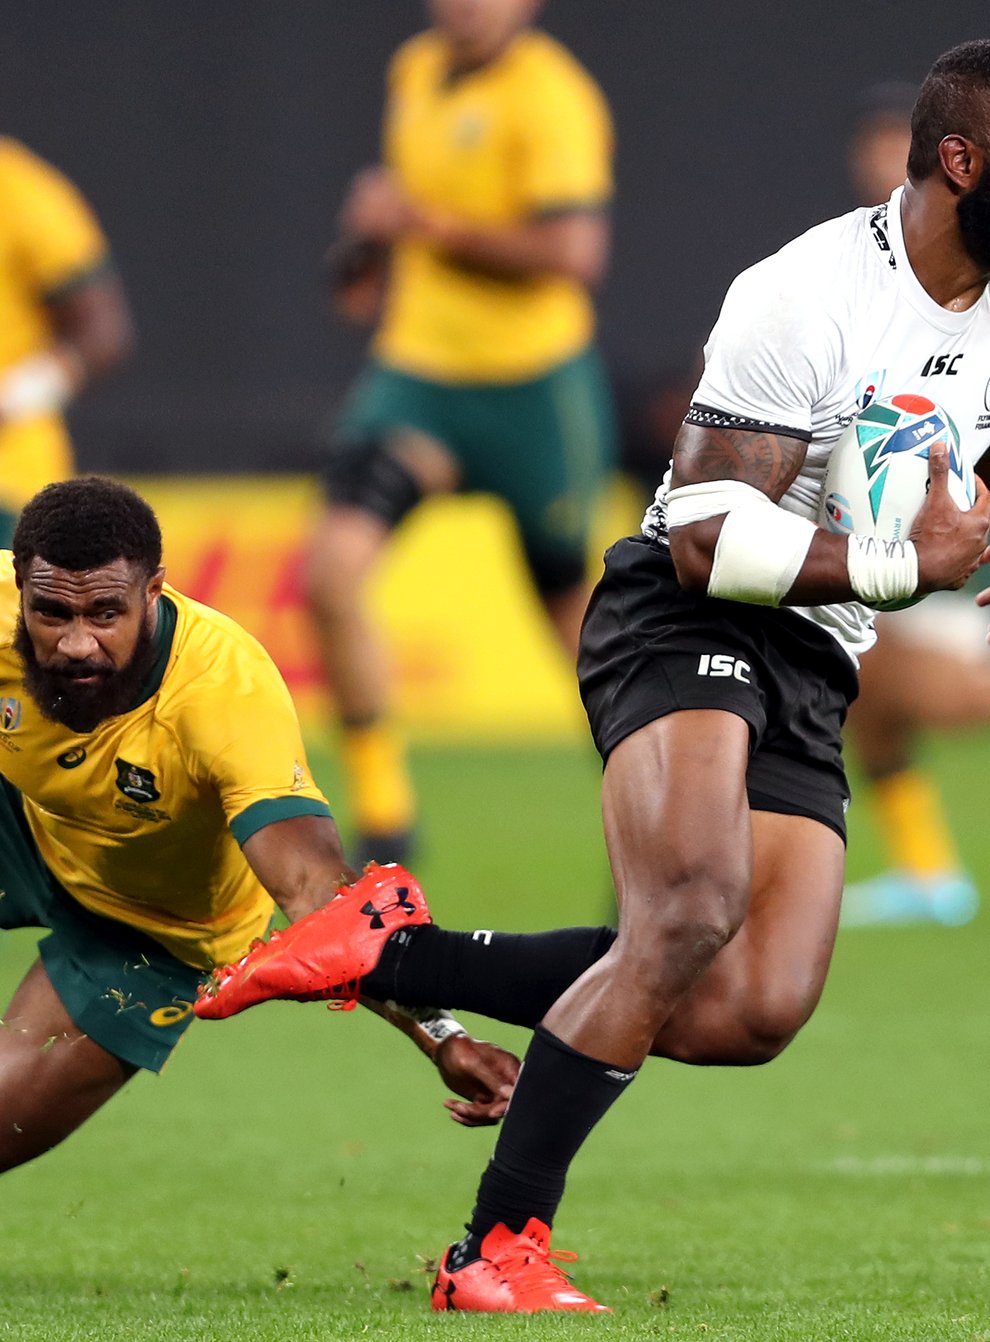 Fiji star Semi Radradra is among the sport's most exciting players